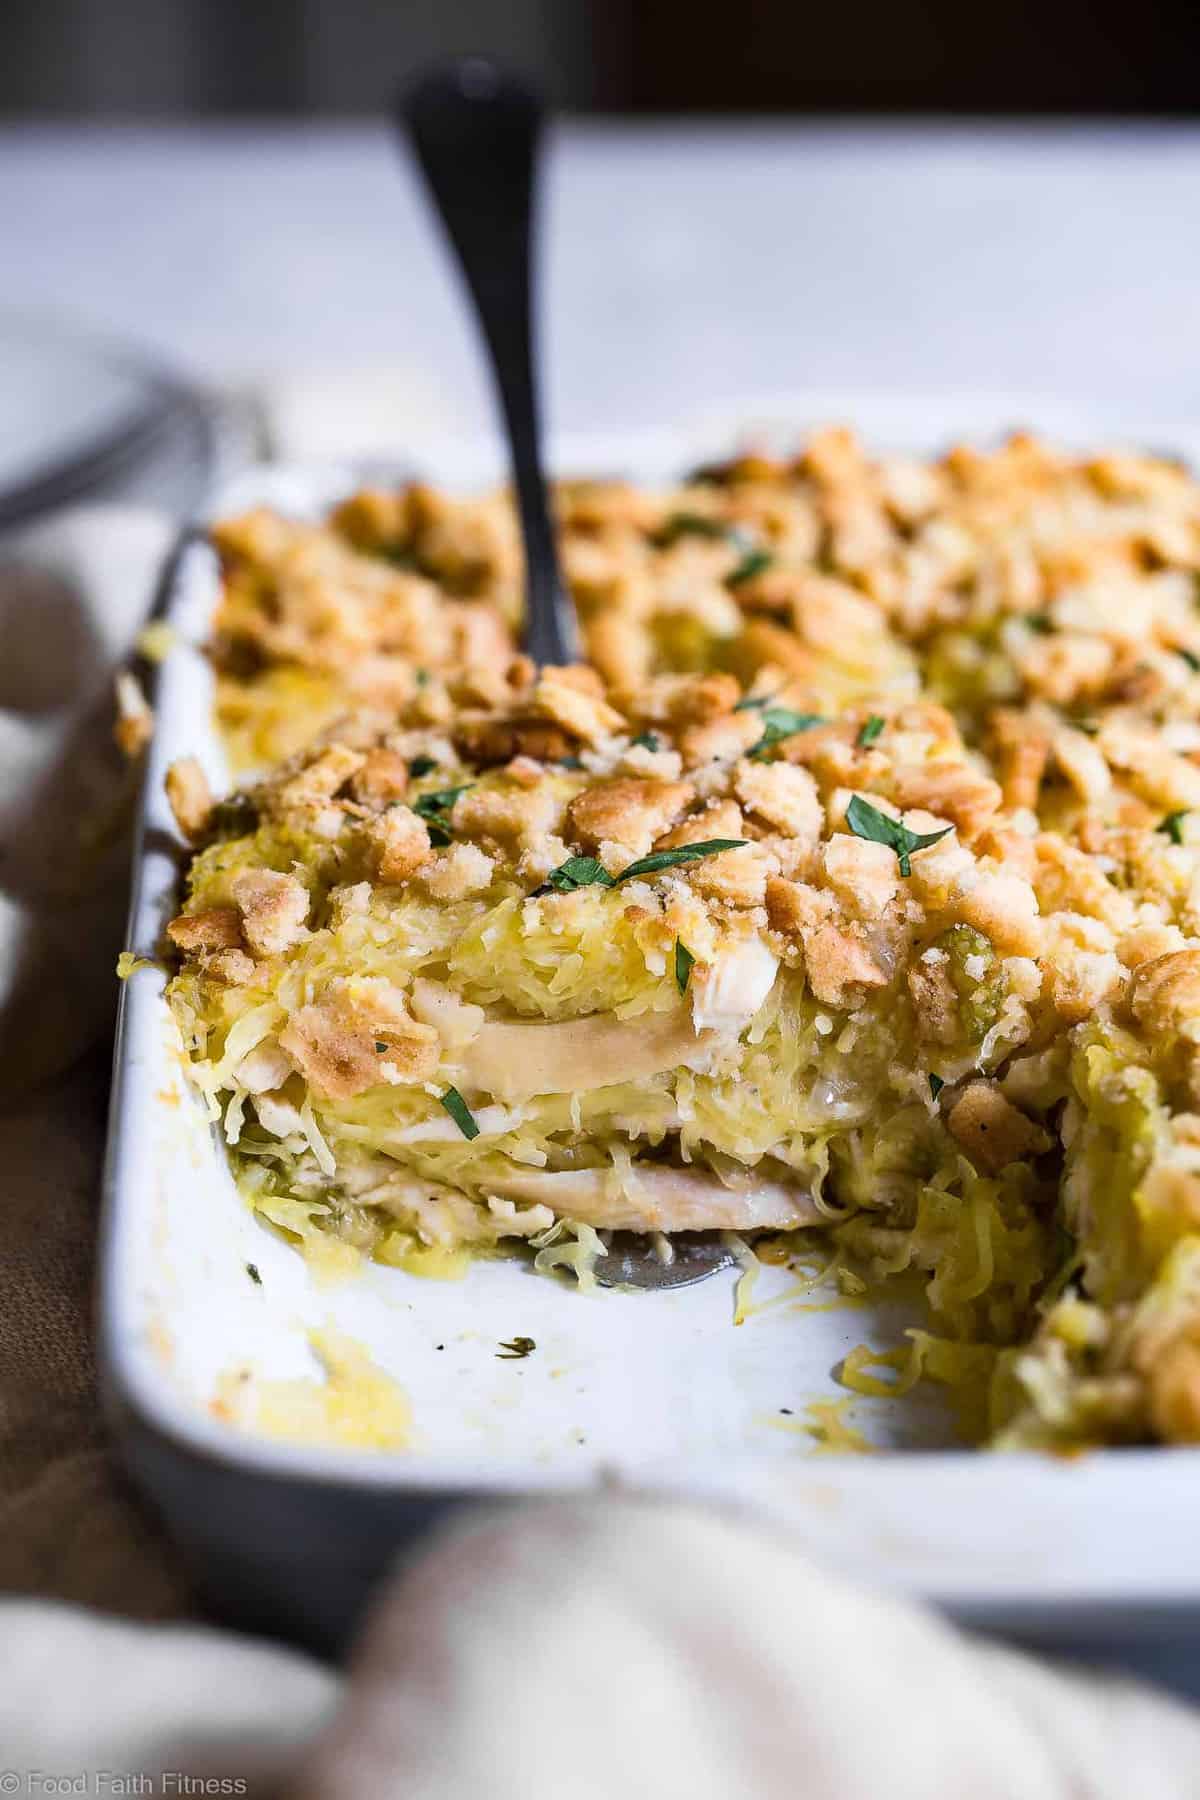 Healthy Chicken "Noodle" Spaghetti Squash Casserole - This Healthy Chicken Noodle Casserole uses spaghetti squash so it's gluten free and dairy free! Homemade condensed chicken soup makes it SO creamy! The best healthy comfort food! | #Foodfaithfitness | #Glutenfree #Healthy #Dairyfree #Spaghettisquash #Casserole